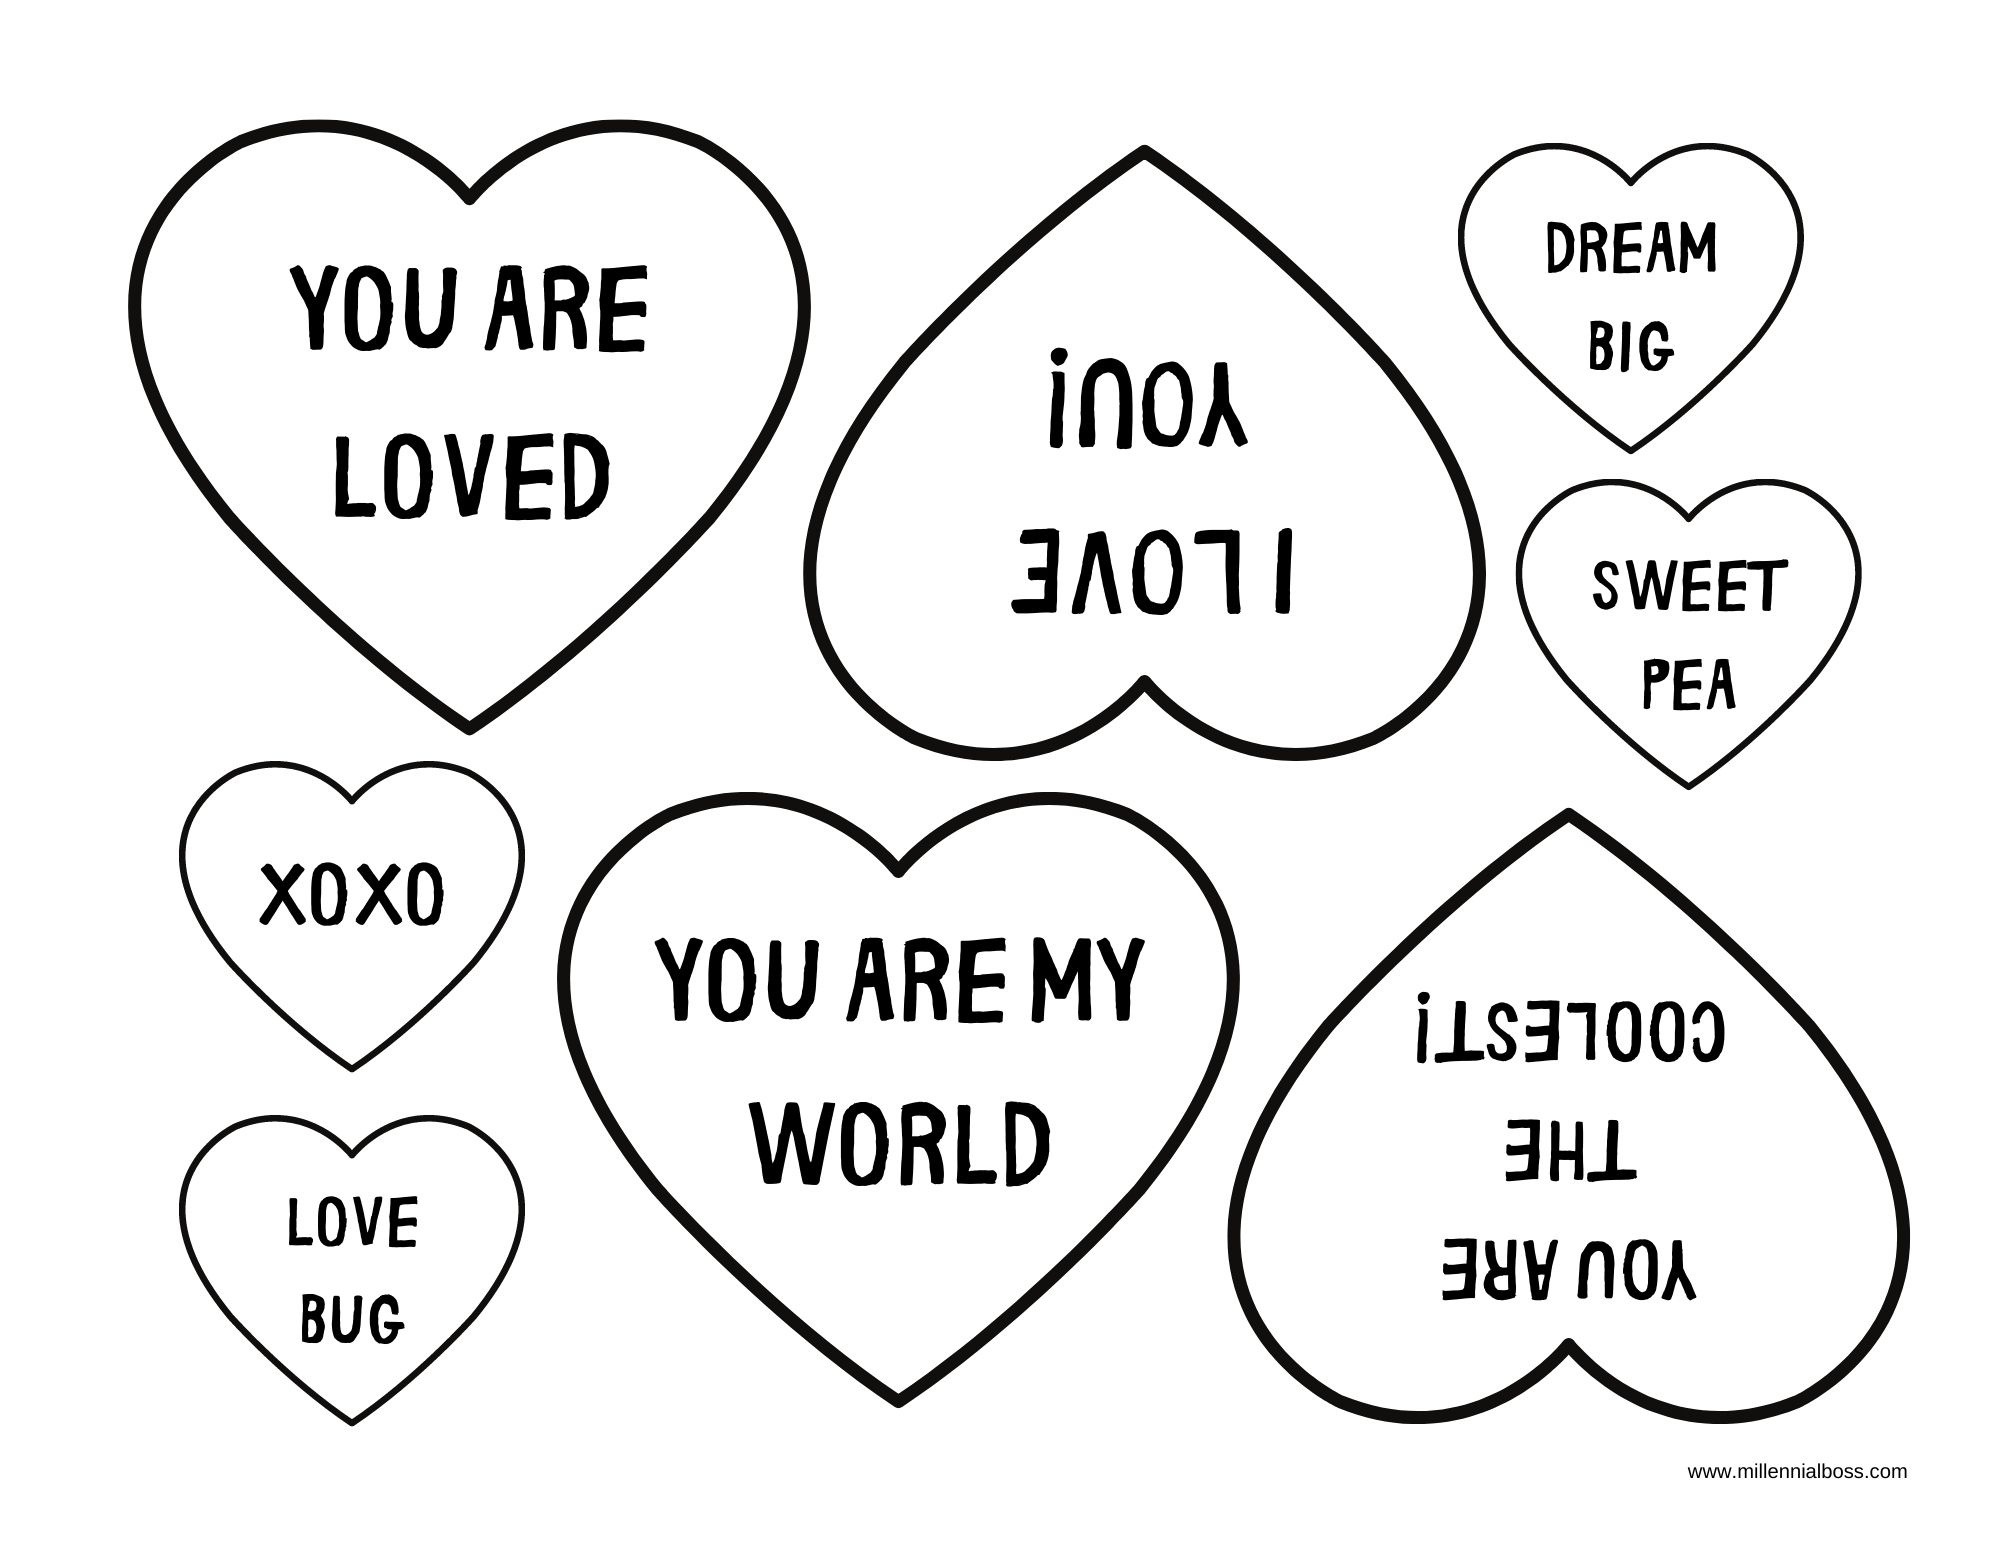 free-heart-templates-pdf-in-all-different-sizes